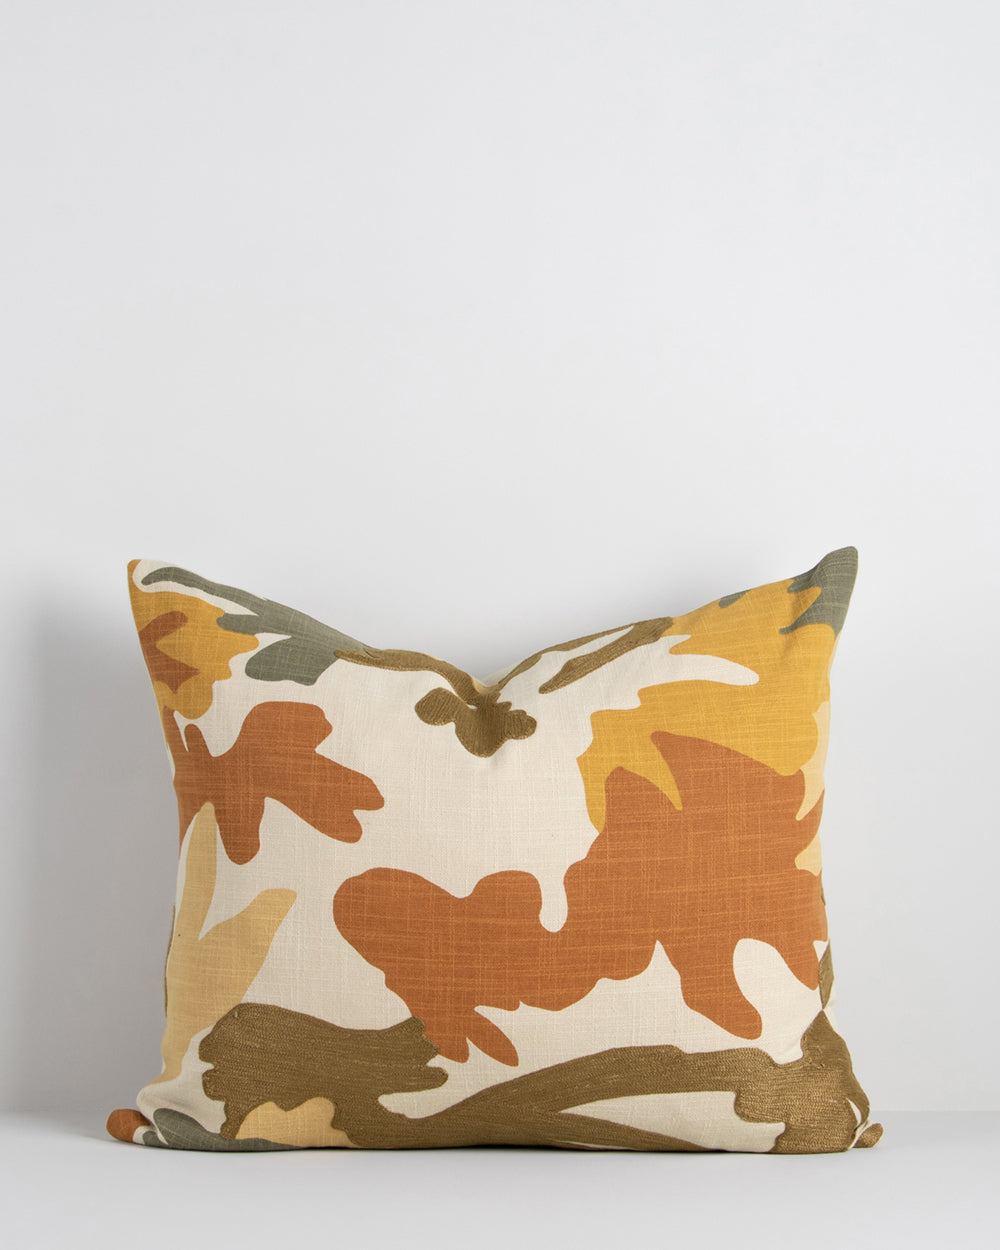 Maschera cotton cushion from the Baya Collection with jungle patterns in mustard, olive, ecru rust